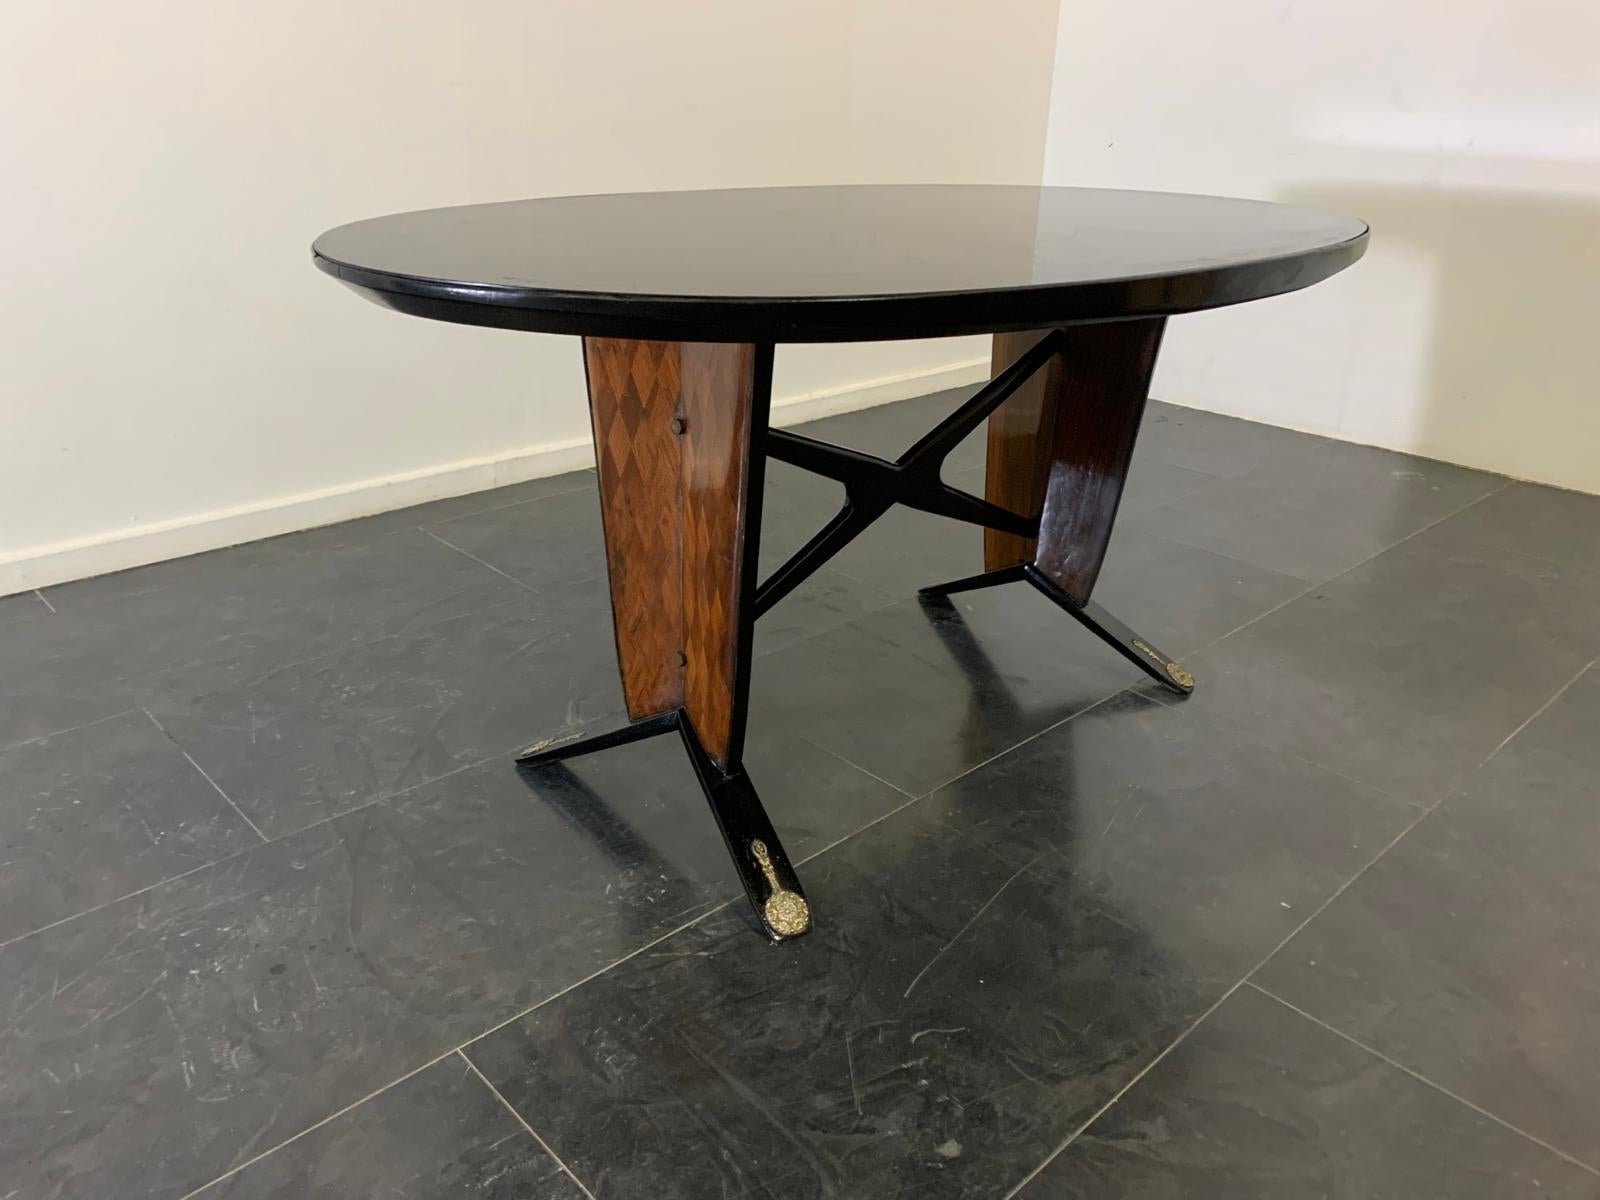 Oval ebonized wood, mahogany and black glass table, 1950s. Under-top cross vault, feet and borders are ebonized. Under the top stands out the finely inlaid rhomboid-patterned base that ends by resting on vertical laths with delightfully rich brass